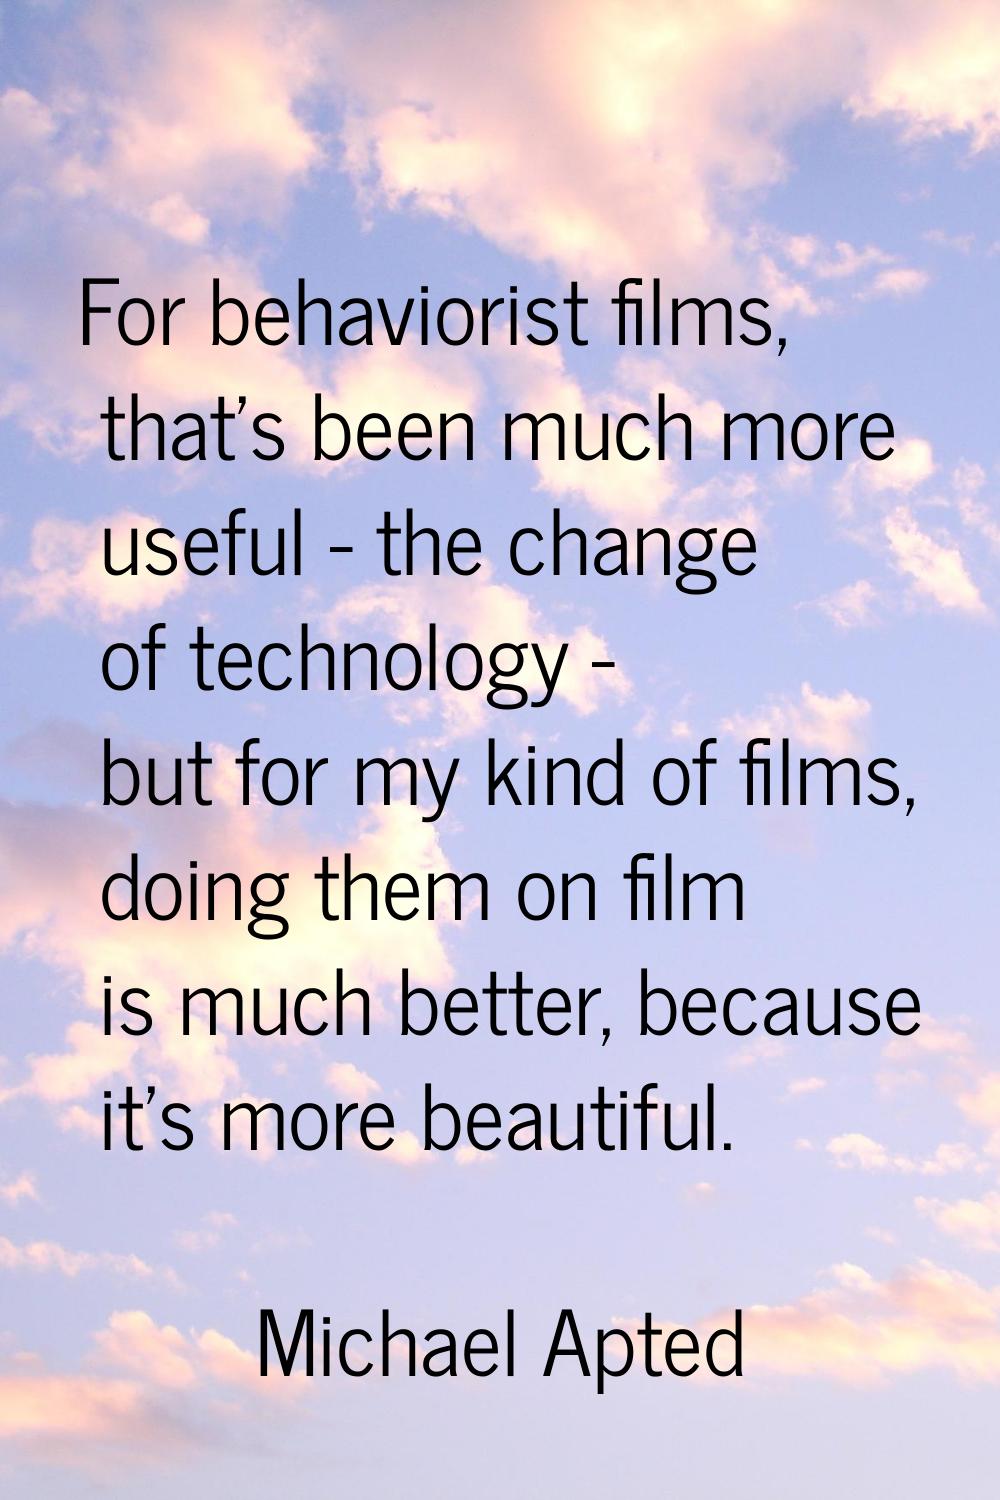 For behaviorist films, that's been much more useful - the change of technology - but for my kind of